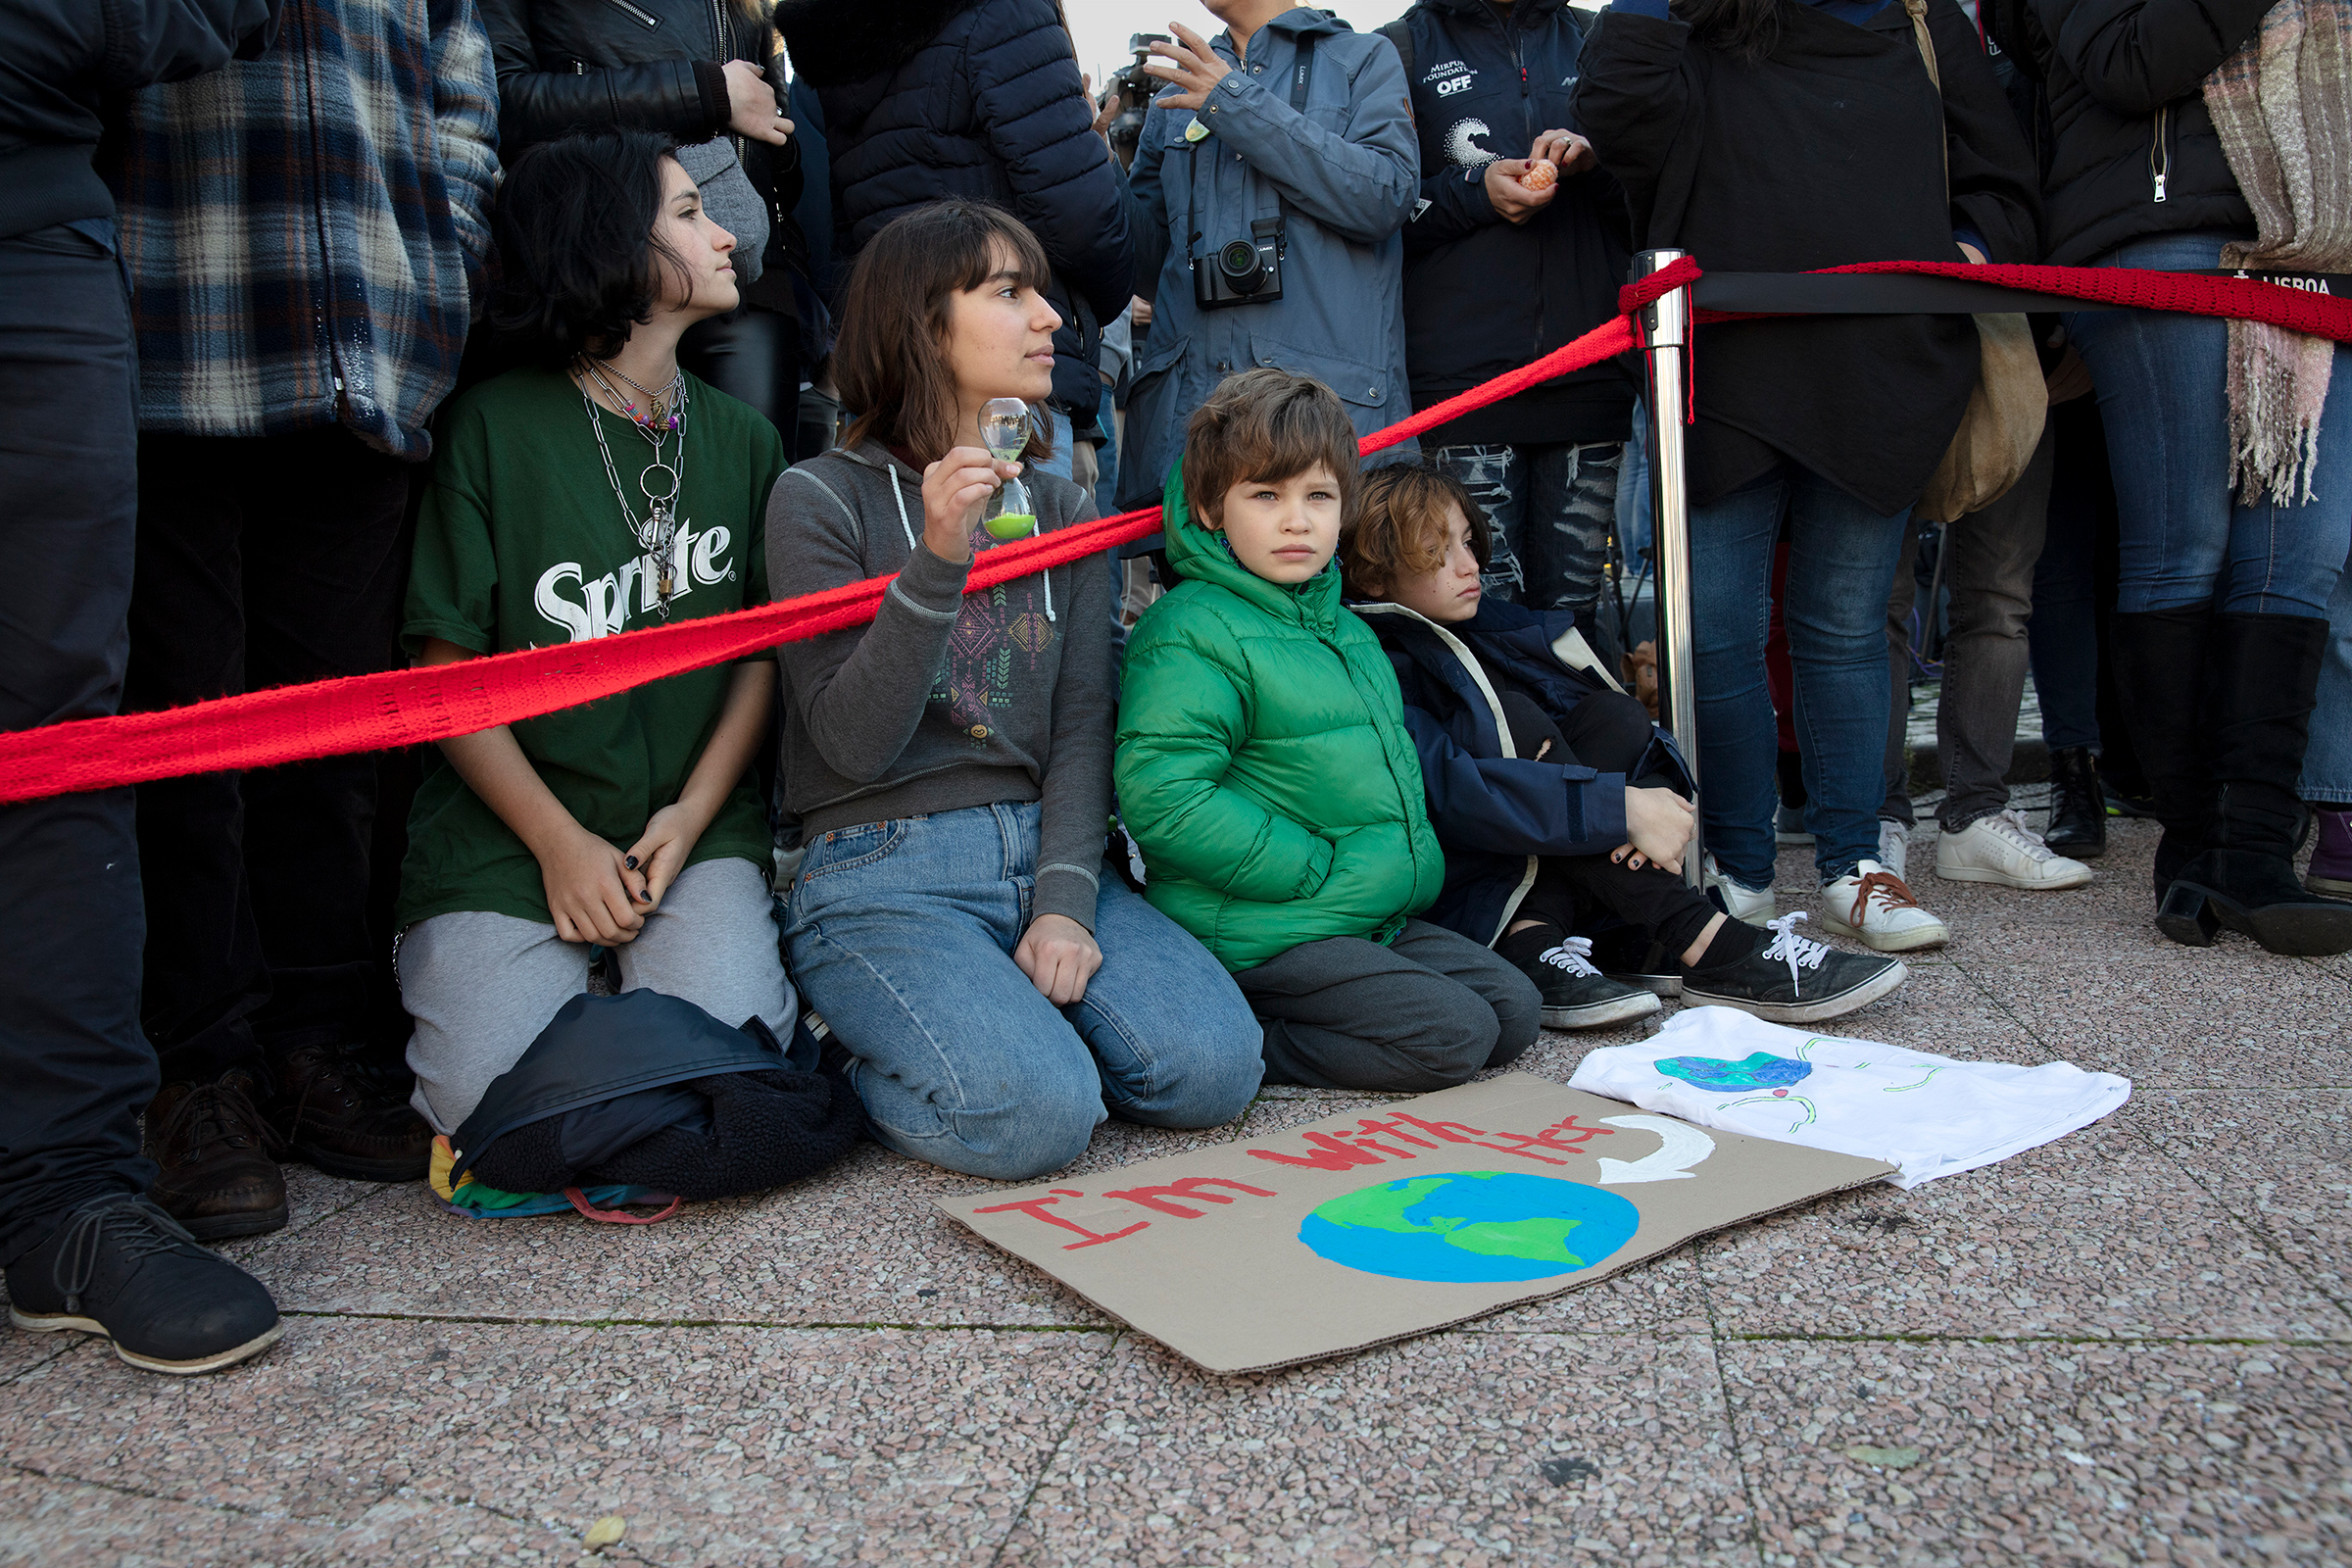 Young supporters of Greta Thunberg await her arrival in Santo Amaro Recreation dock on December 03, 2019 in Lisbon, Portugal. (Evgenia Arbugaeva for TIME)